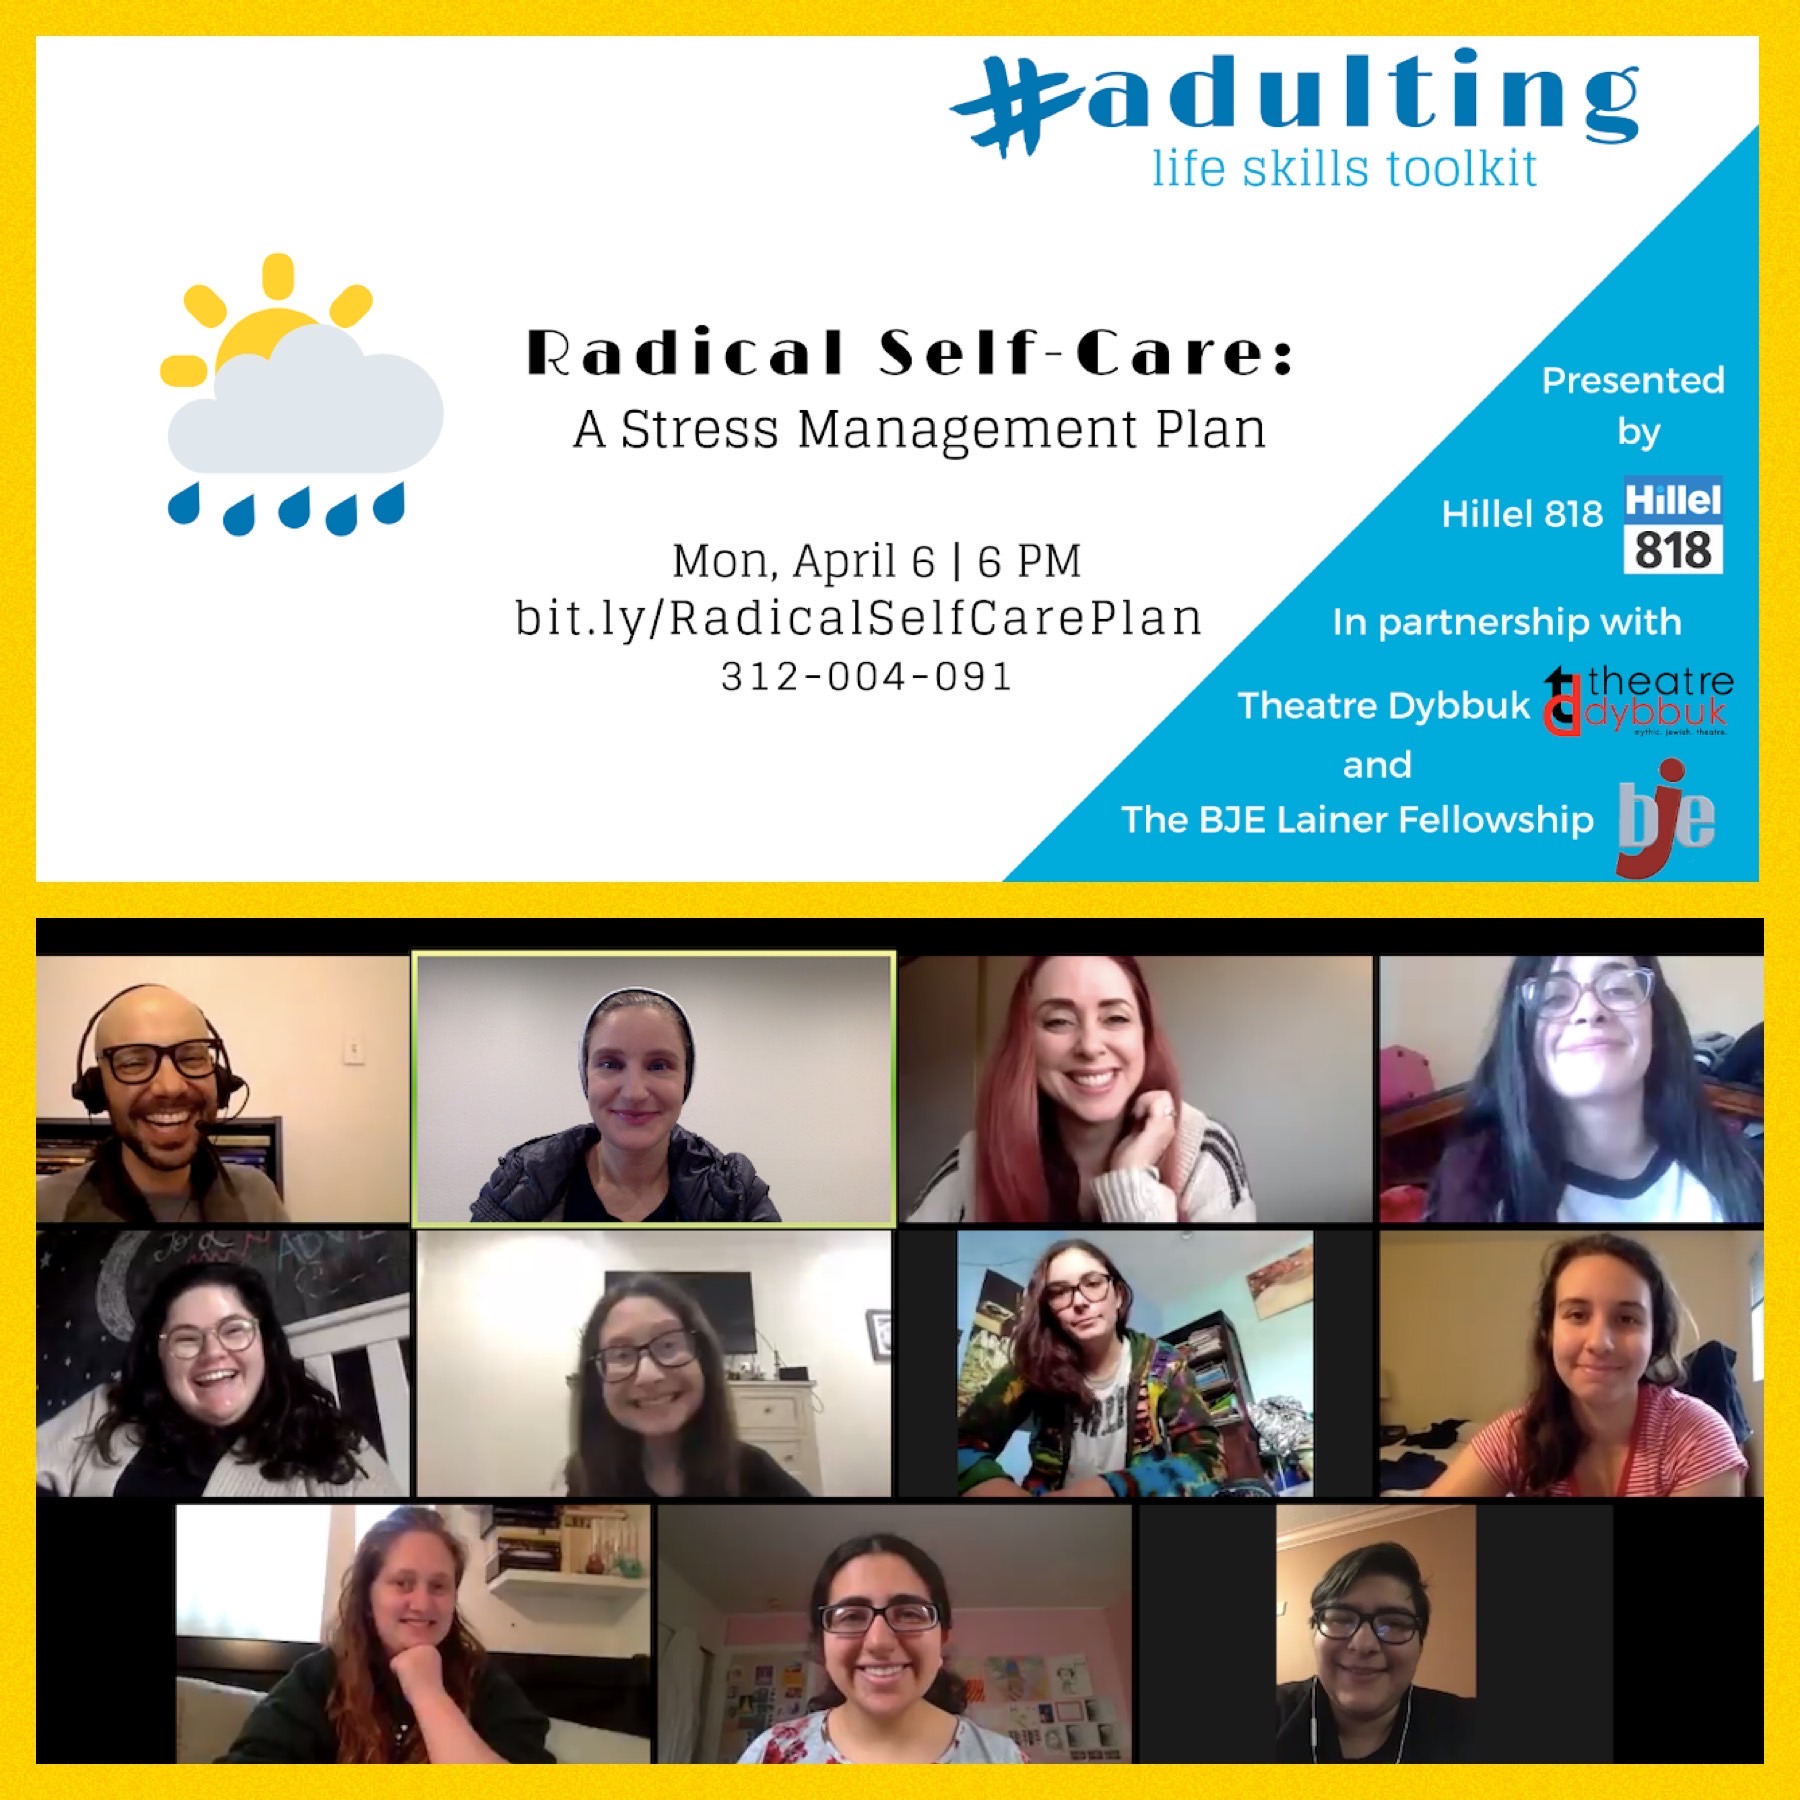 A promotional material from Hillel 818's Radical Self-Care virtual event series featuring a screenshot from a Zoom conference.